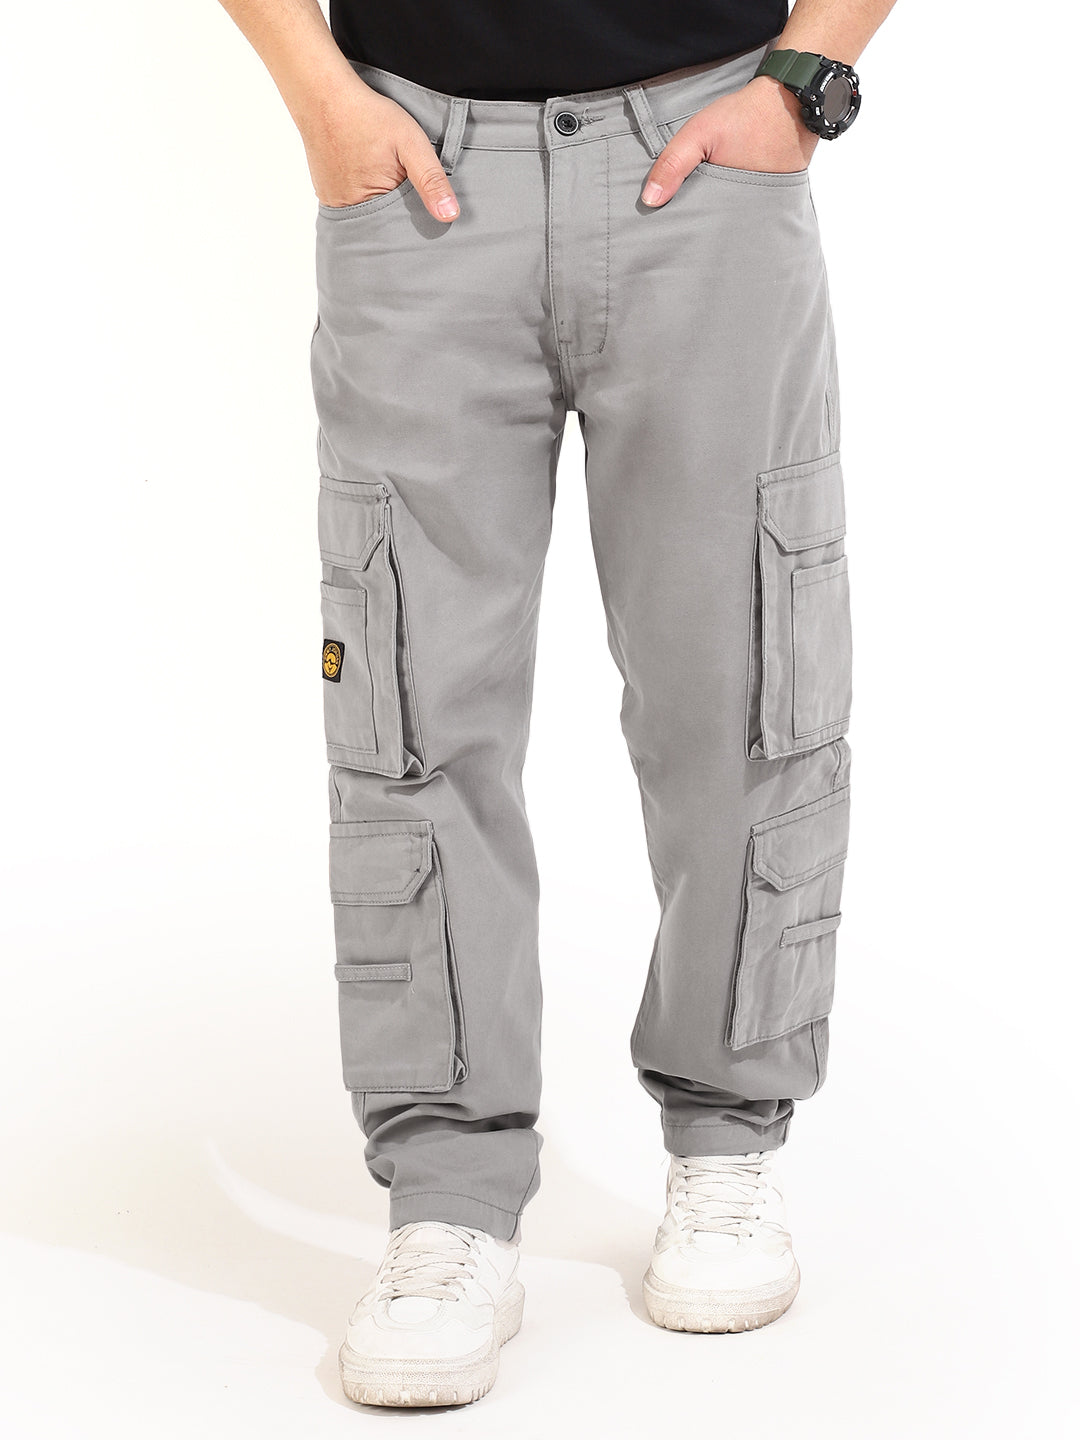 CAYL - 8 Pocket Hiking Pants | HBX - Globally Curated Fashion and Lifestyle  by Hypebeast